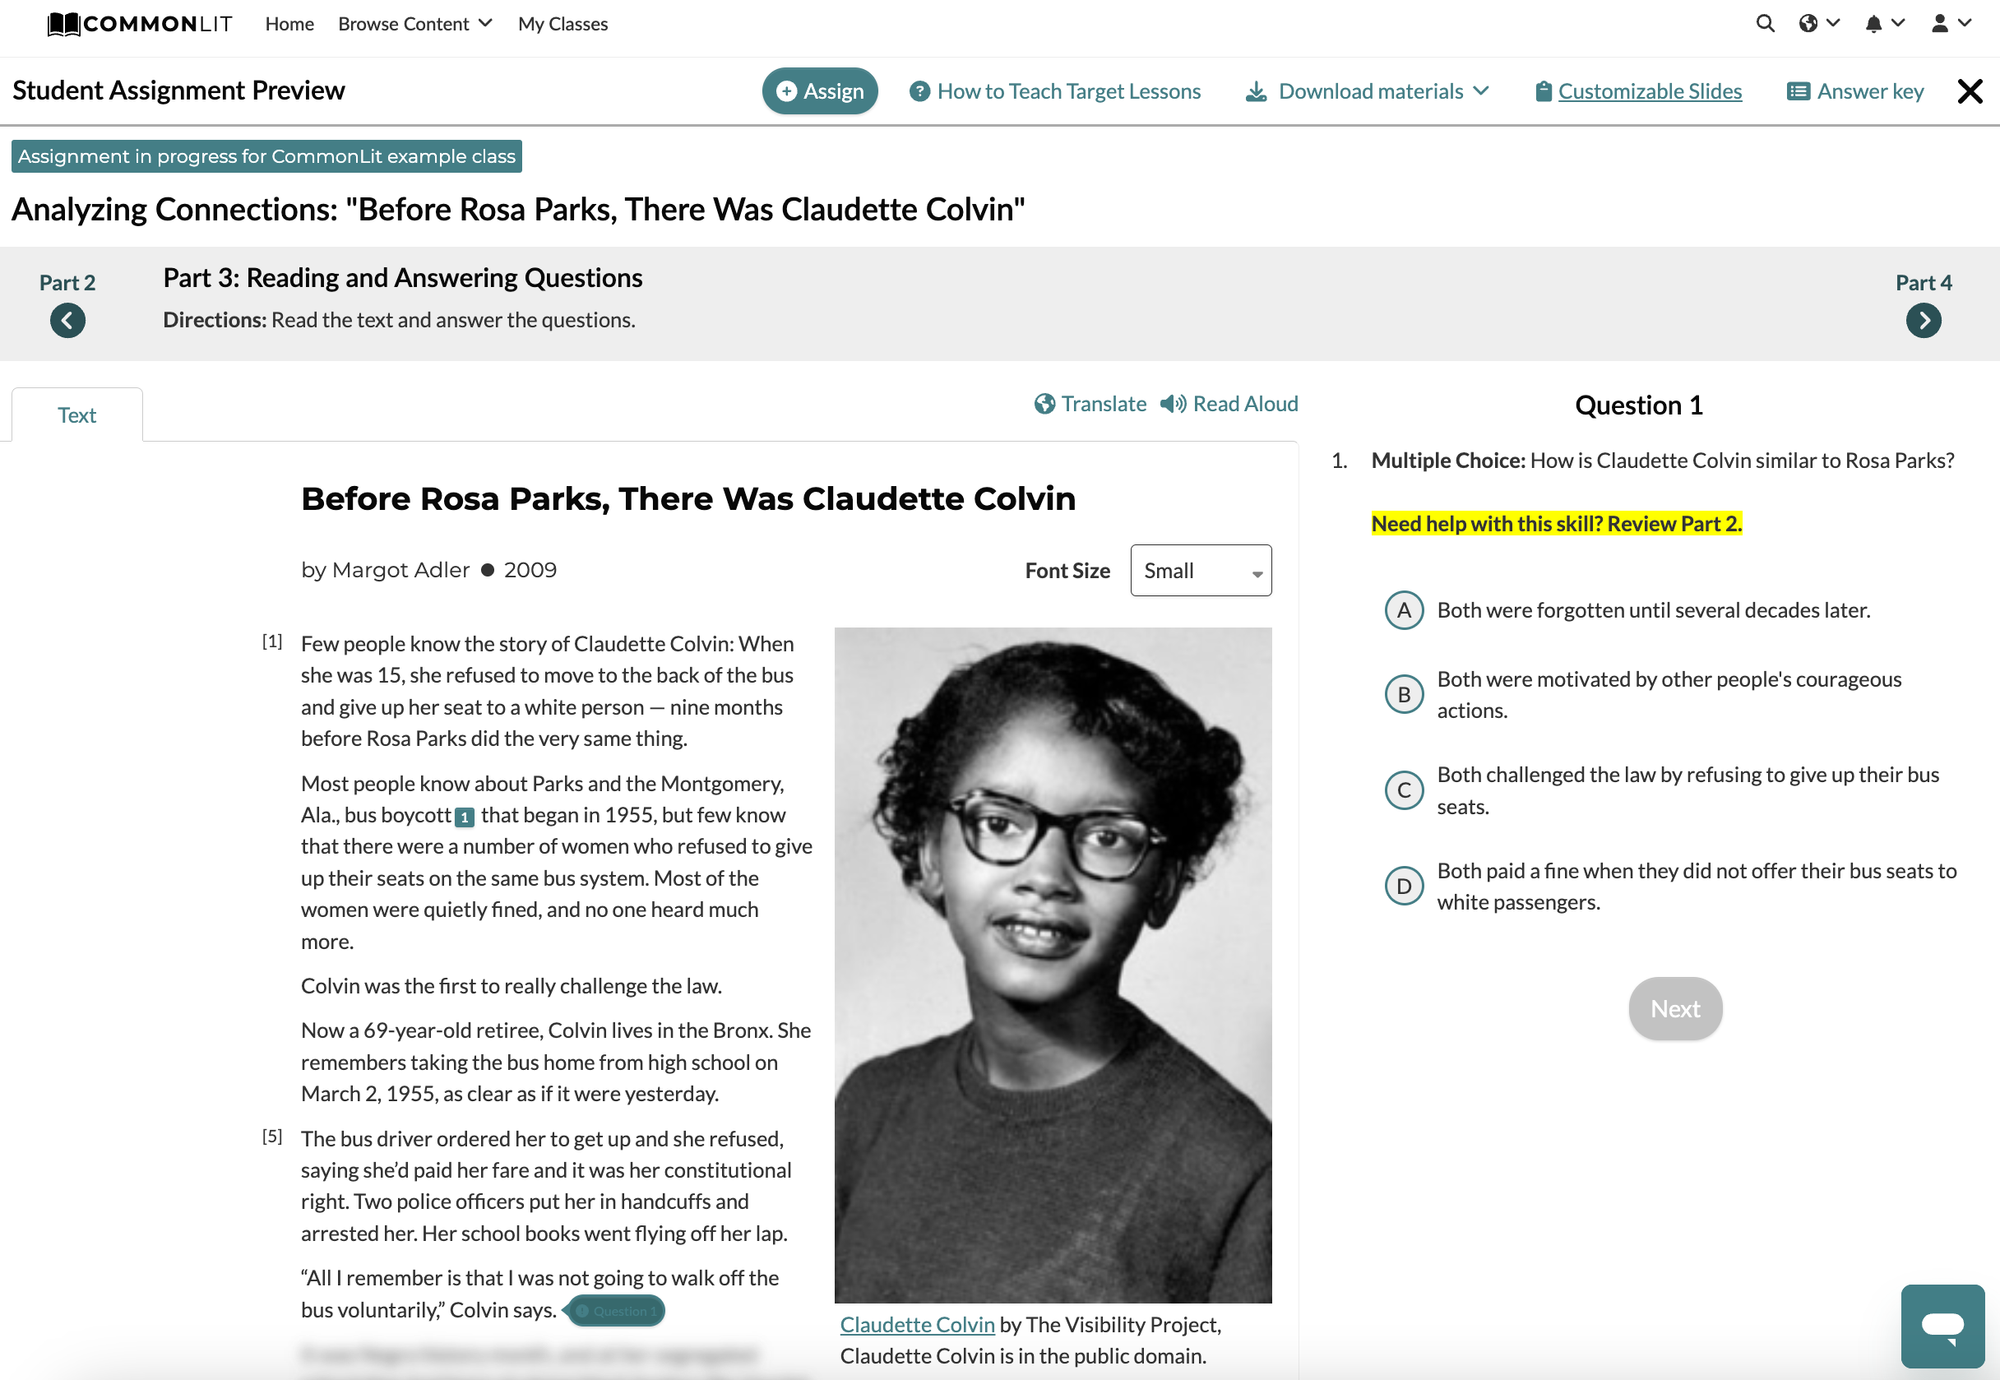 Reading and Questions section for "Before Rosa Parks, There was Claudette Colvin" with Question 1 highlighted